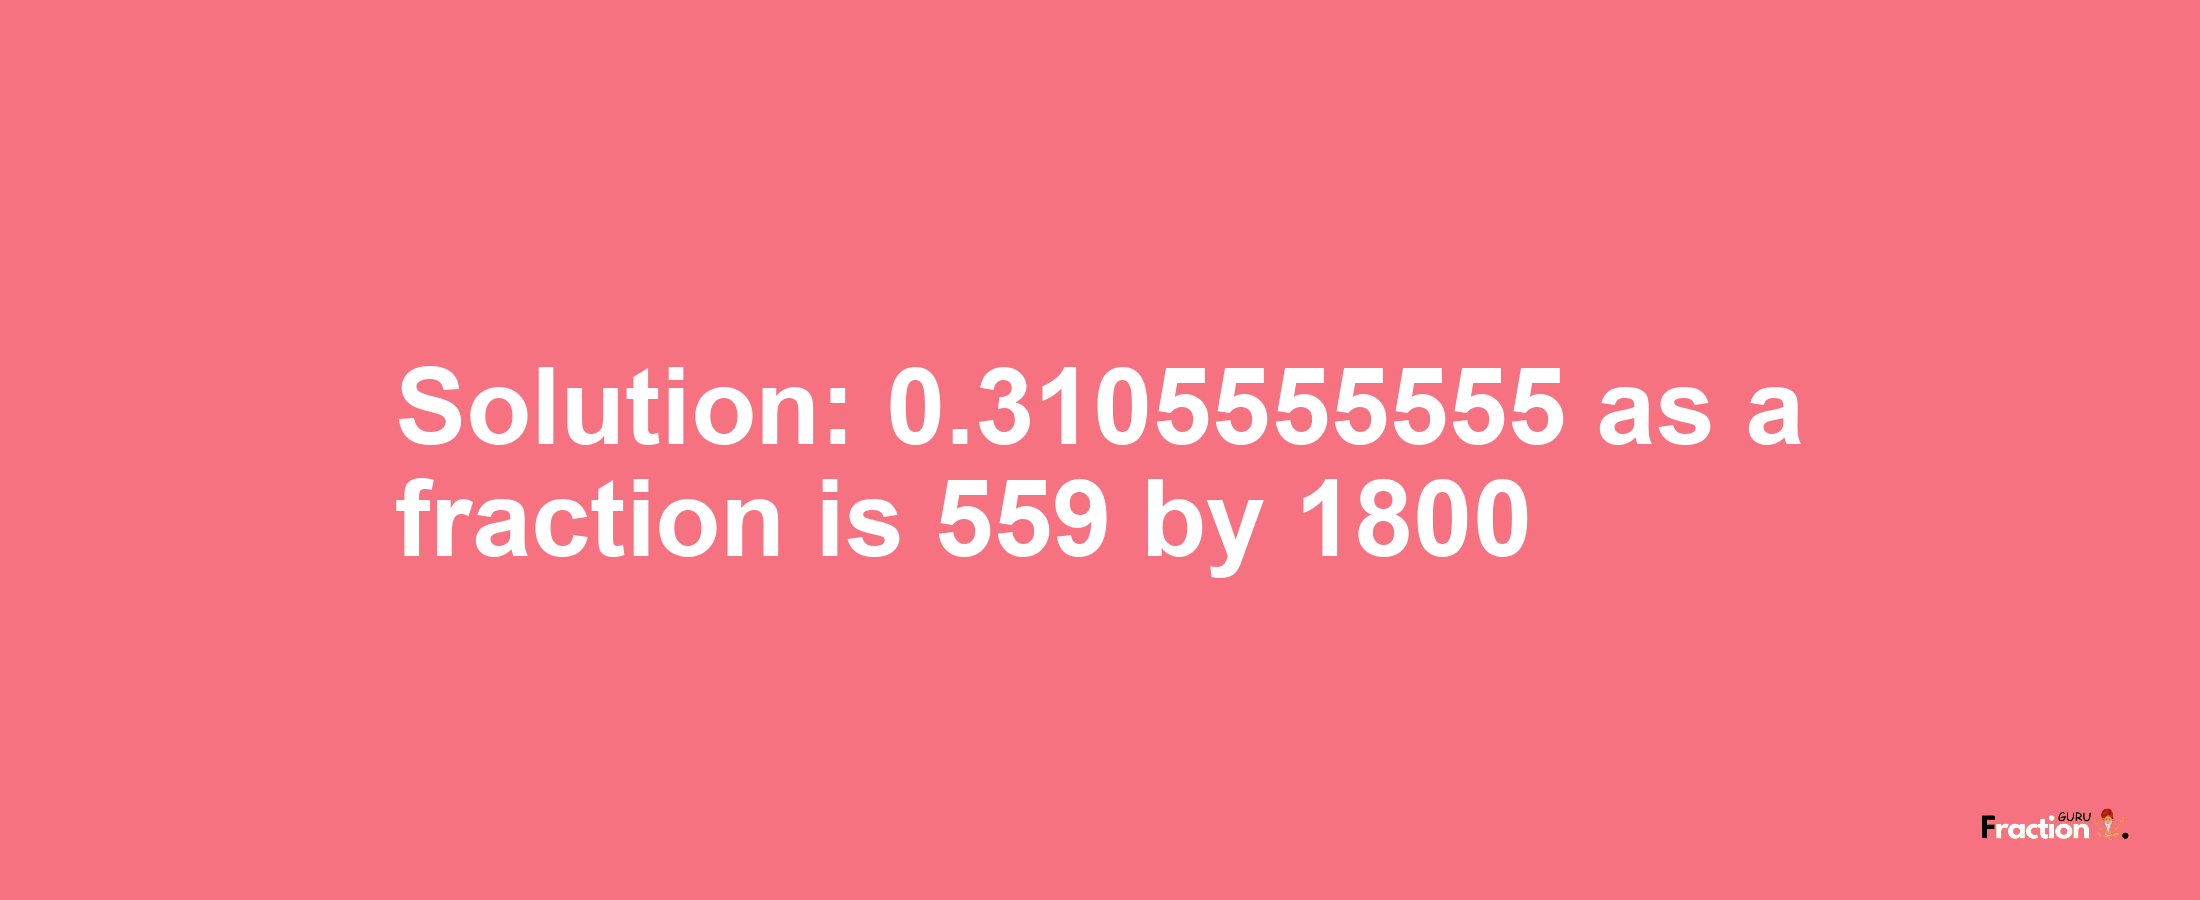 Solution:0.3105555555 as a fraction is 559/1800